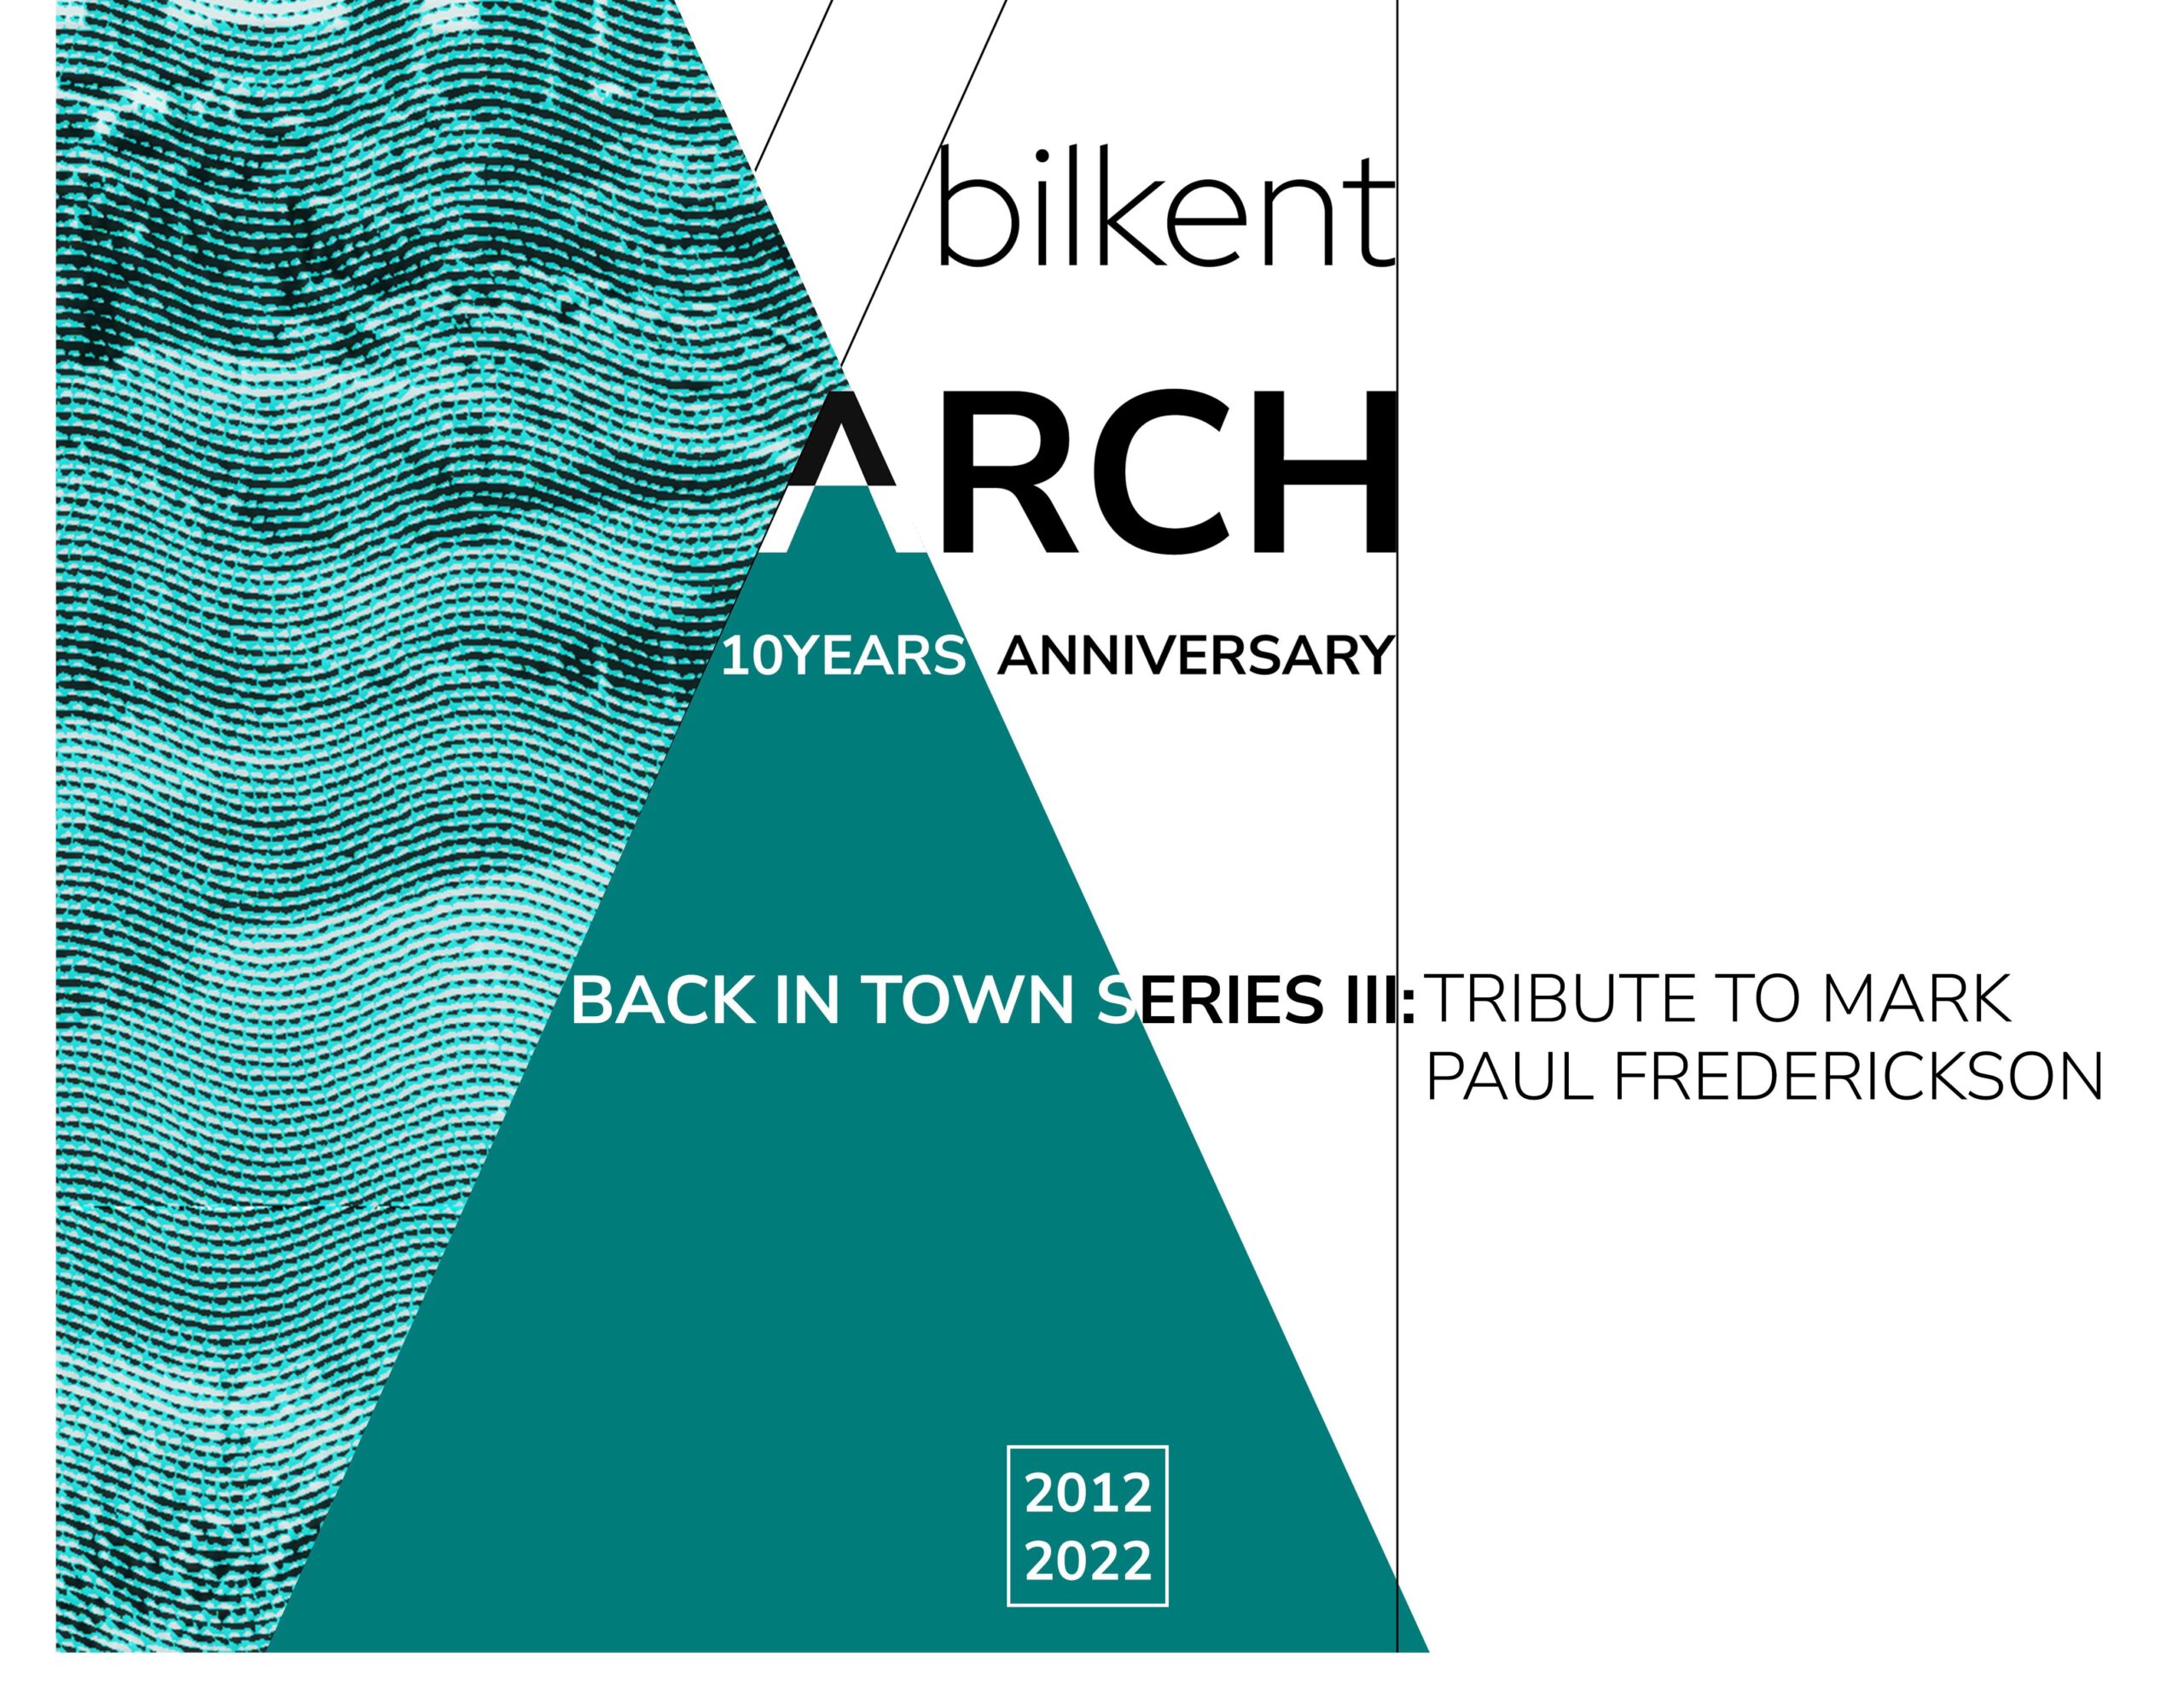 Back in Town 03: Tribute to Mark Paul Frederickson